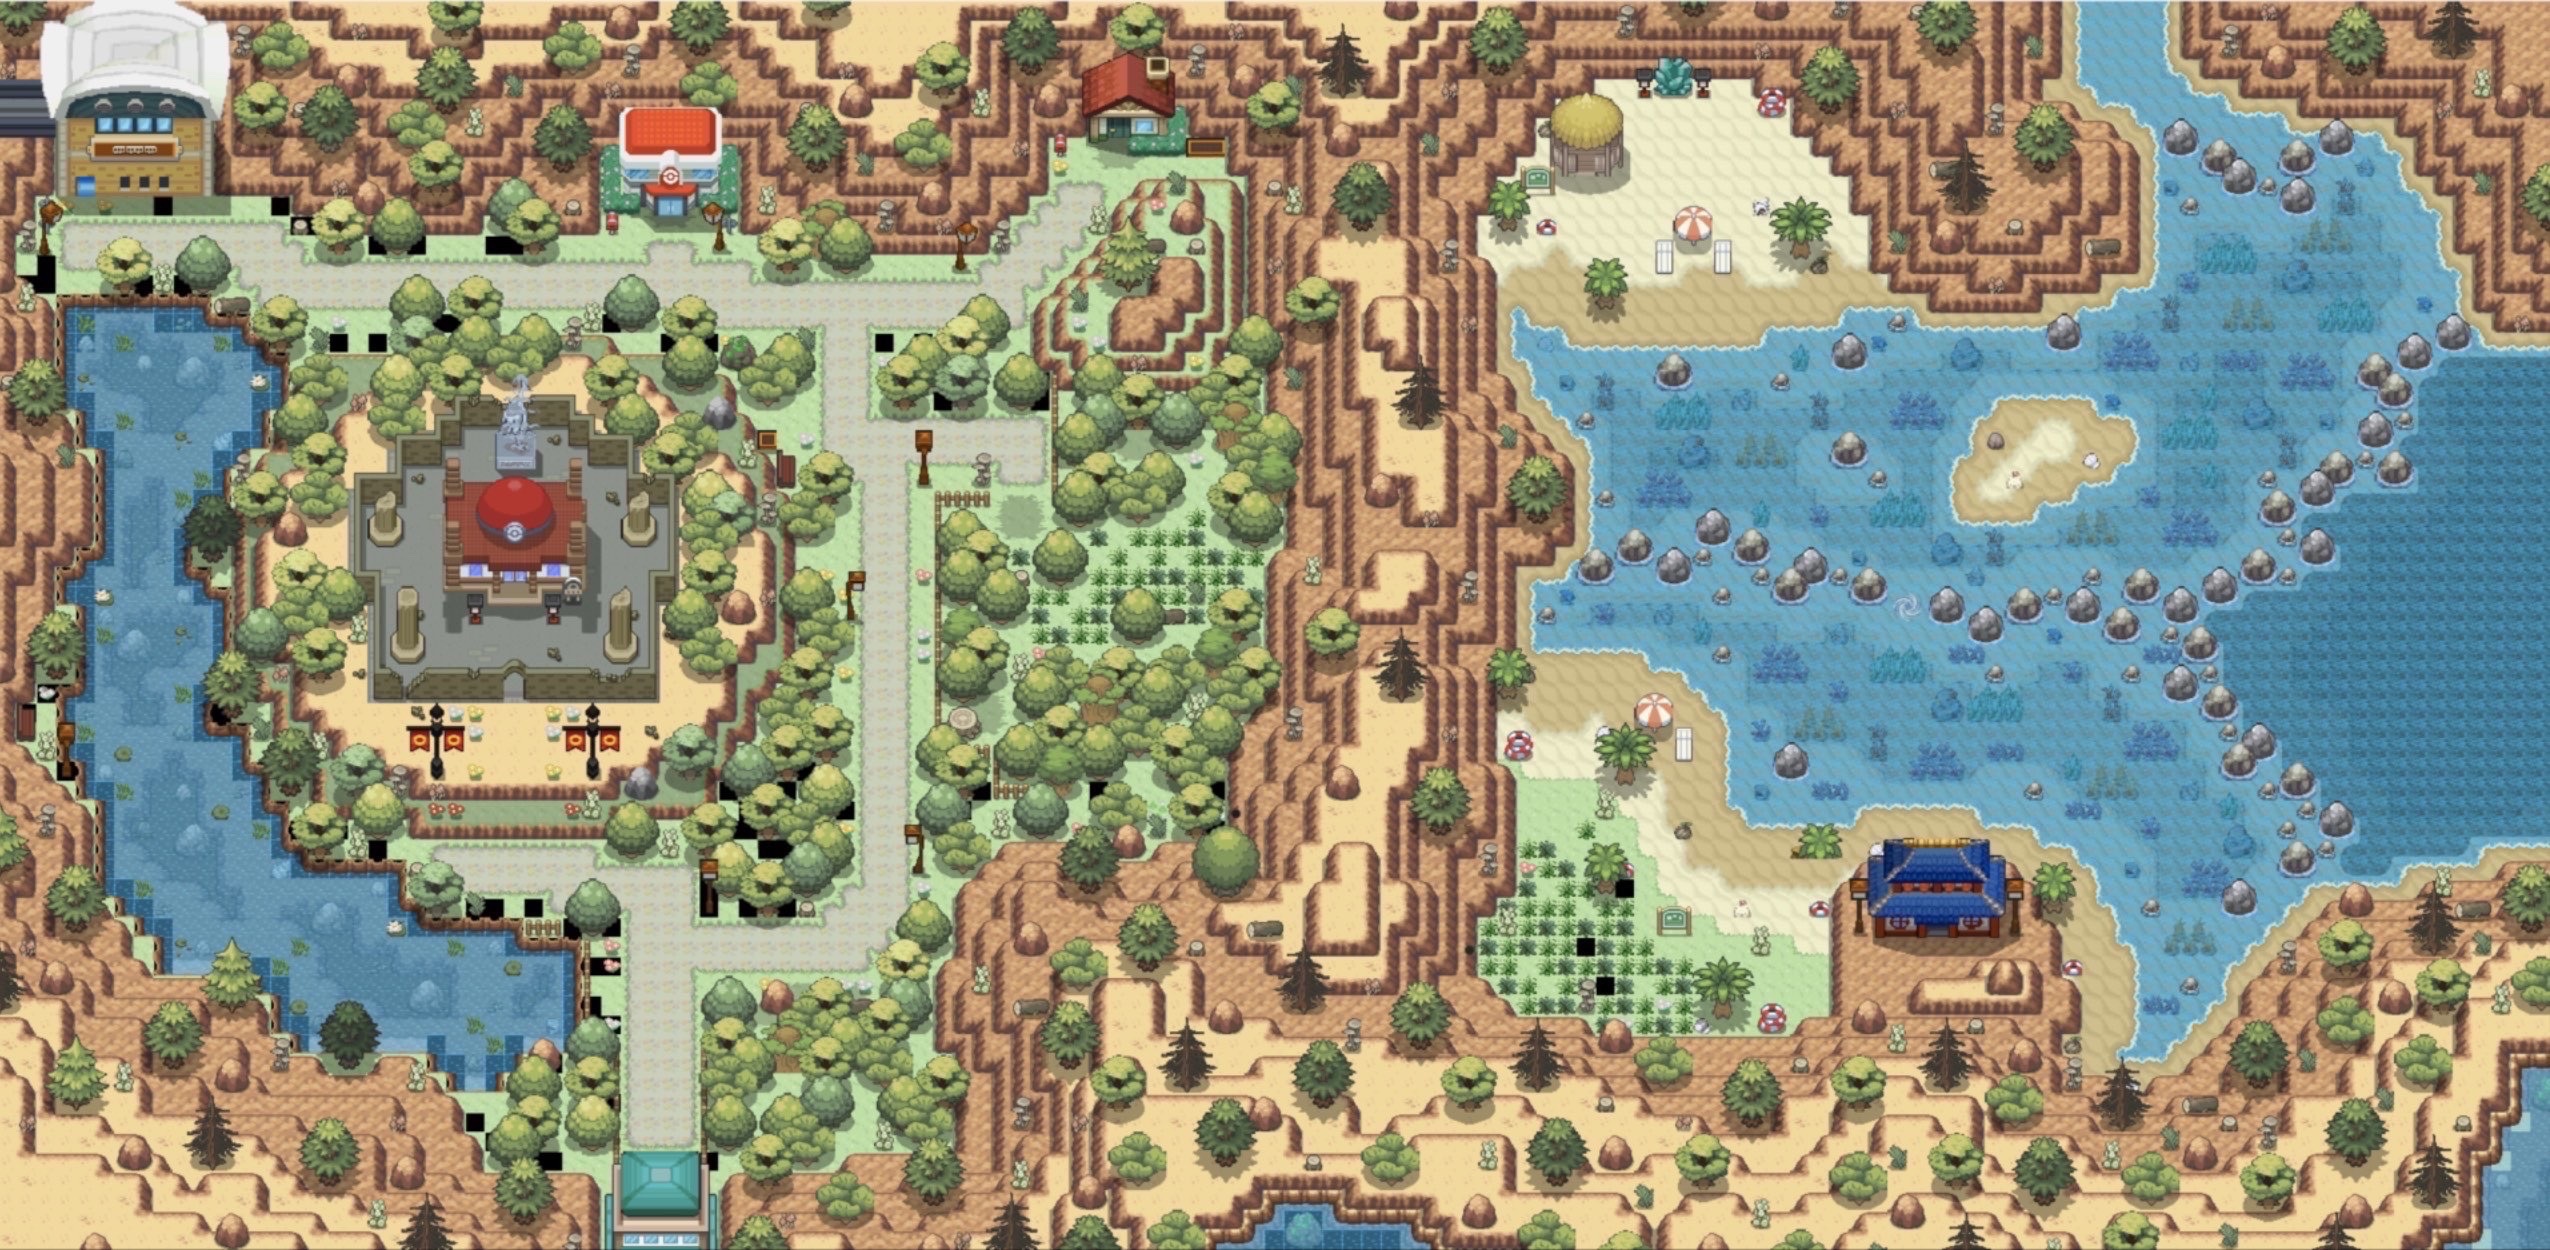 Trainers Valley / Unknown Place